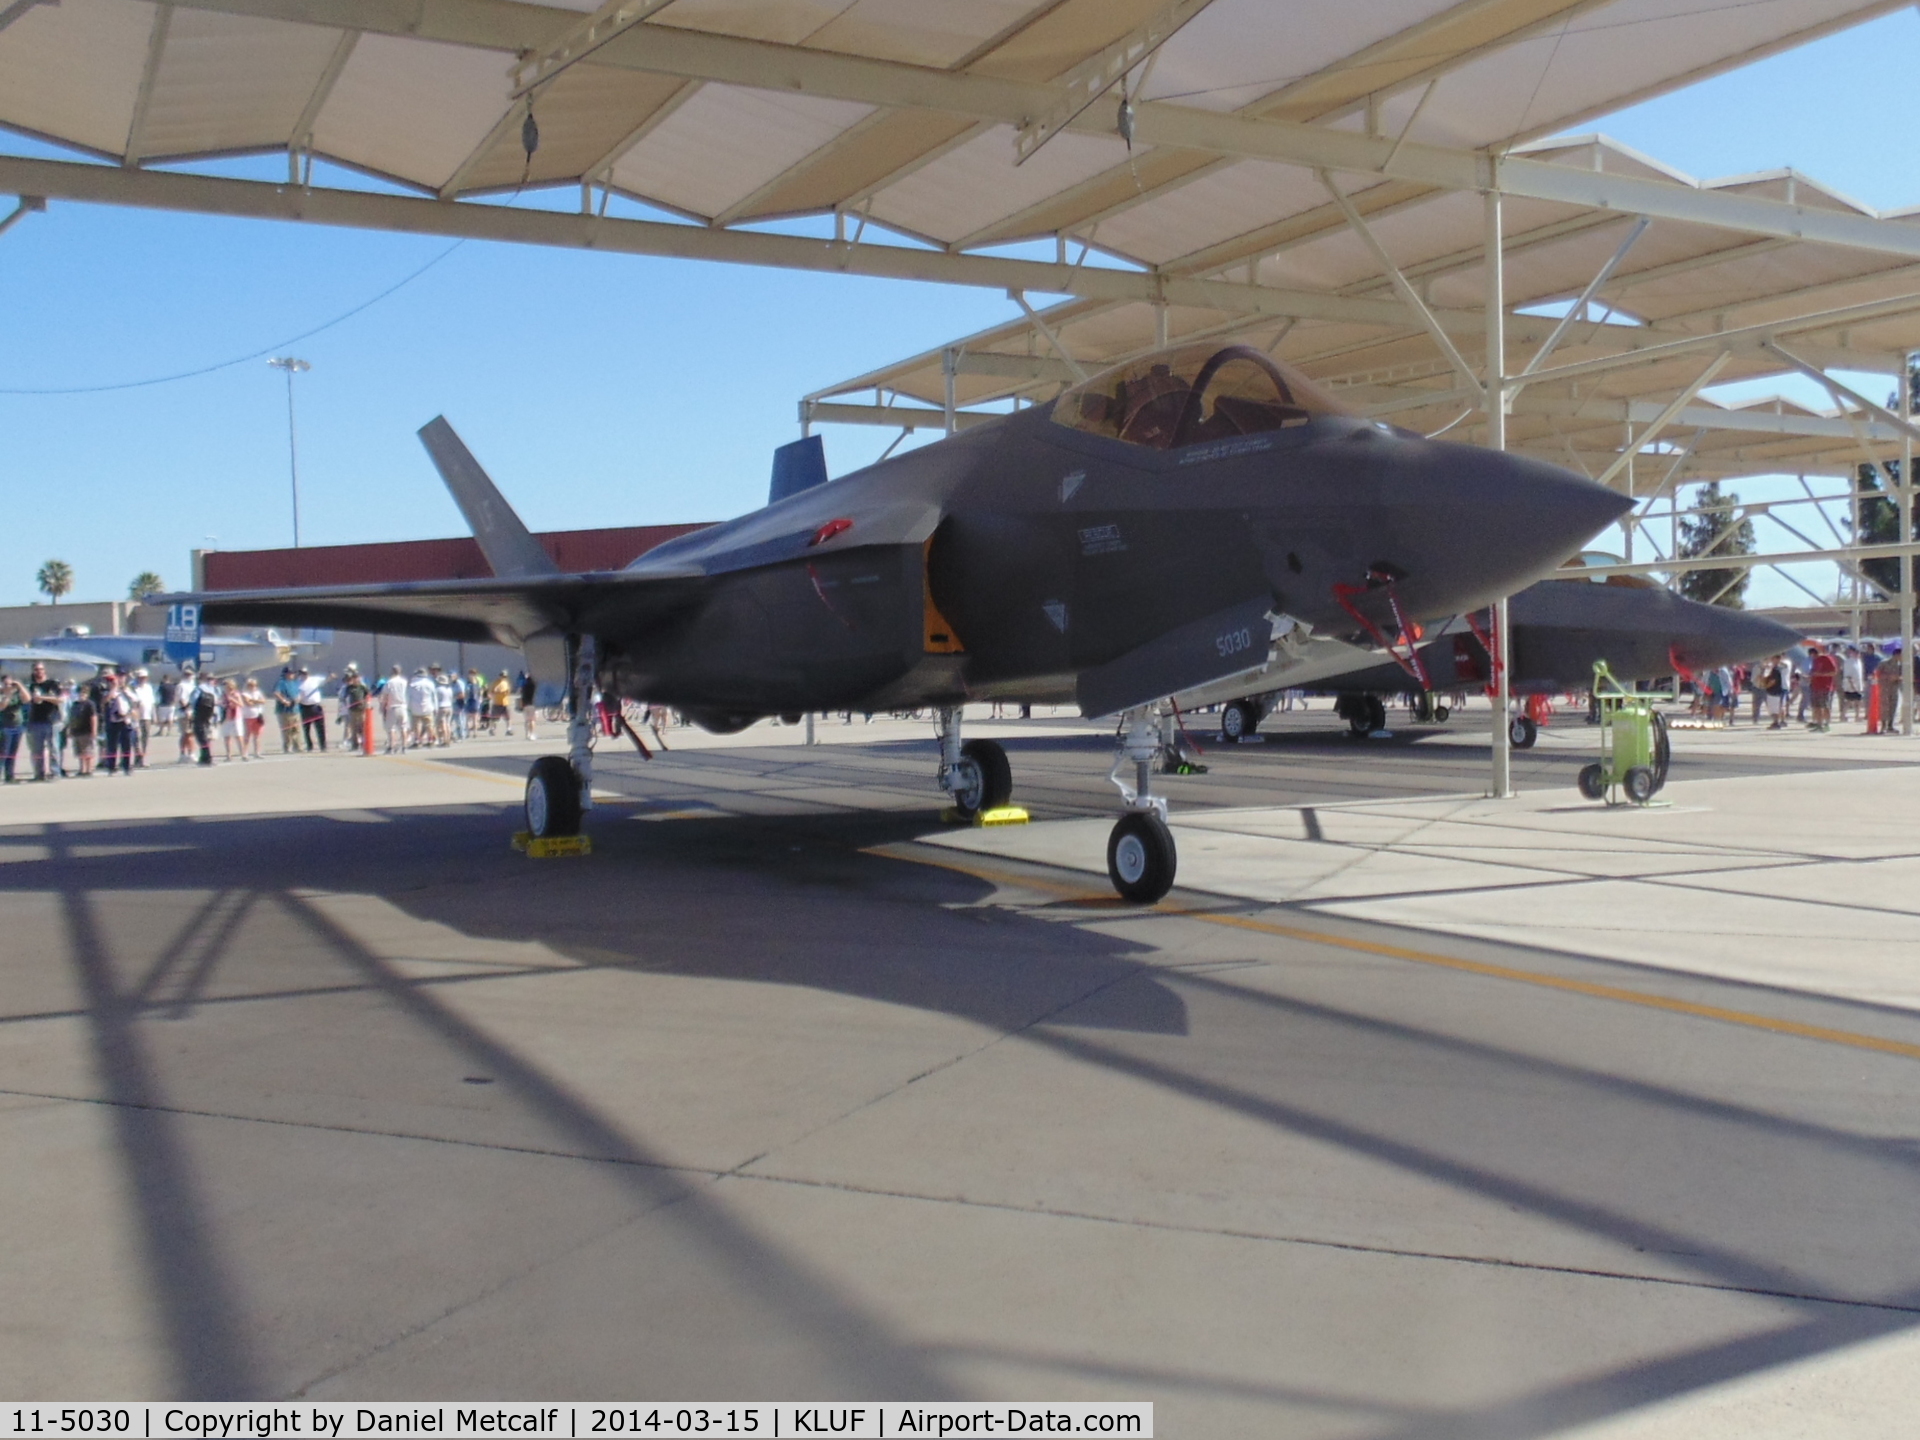 11-5030, 2014 Lockheed Martin F-35A Lightning II C/N AF-41, Seen at the Luke Air Force Base Open House (Luke Days) in March 2014